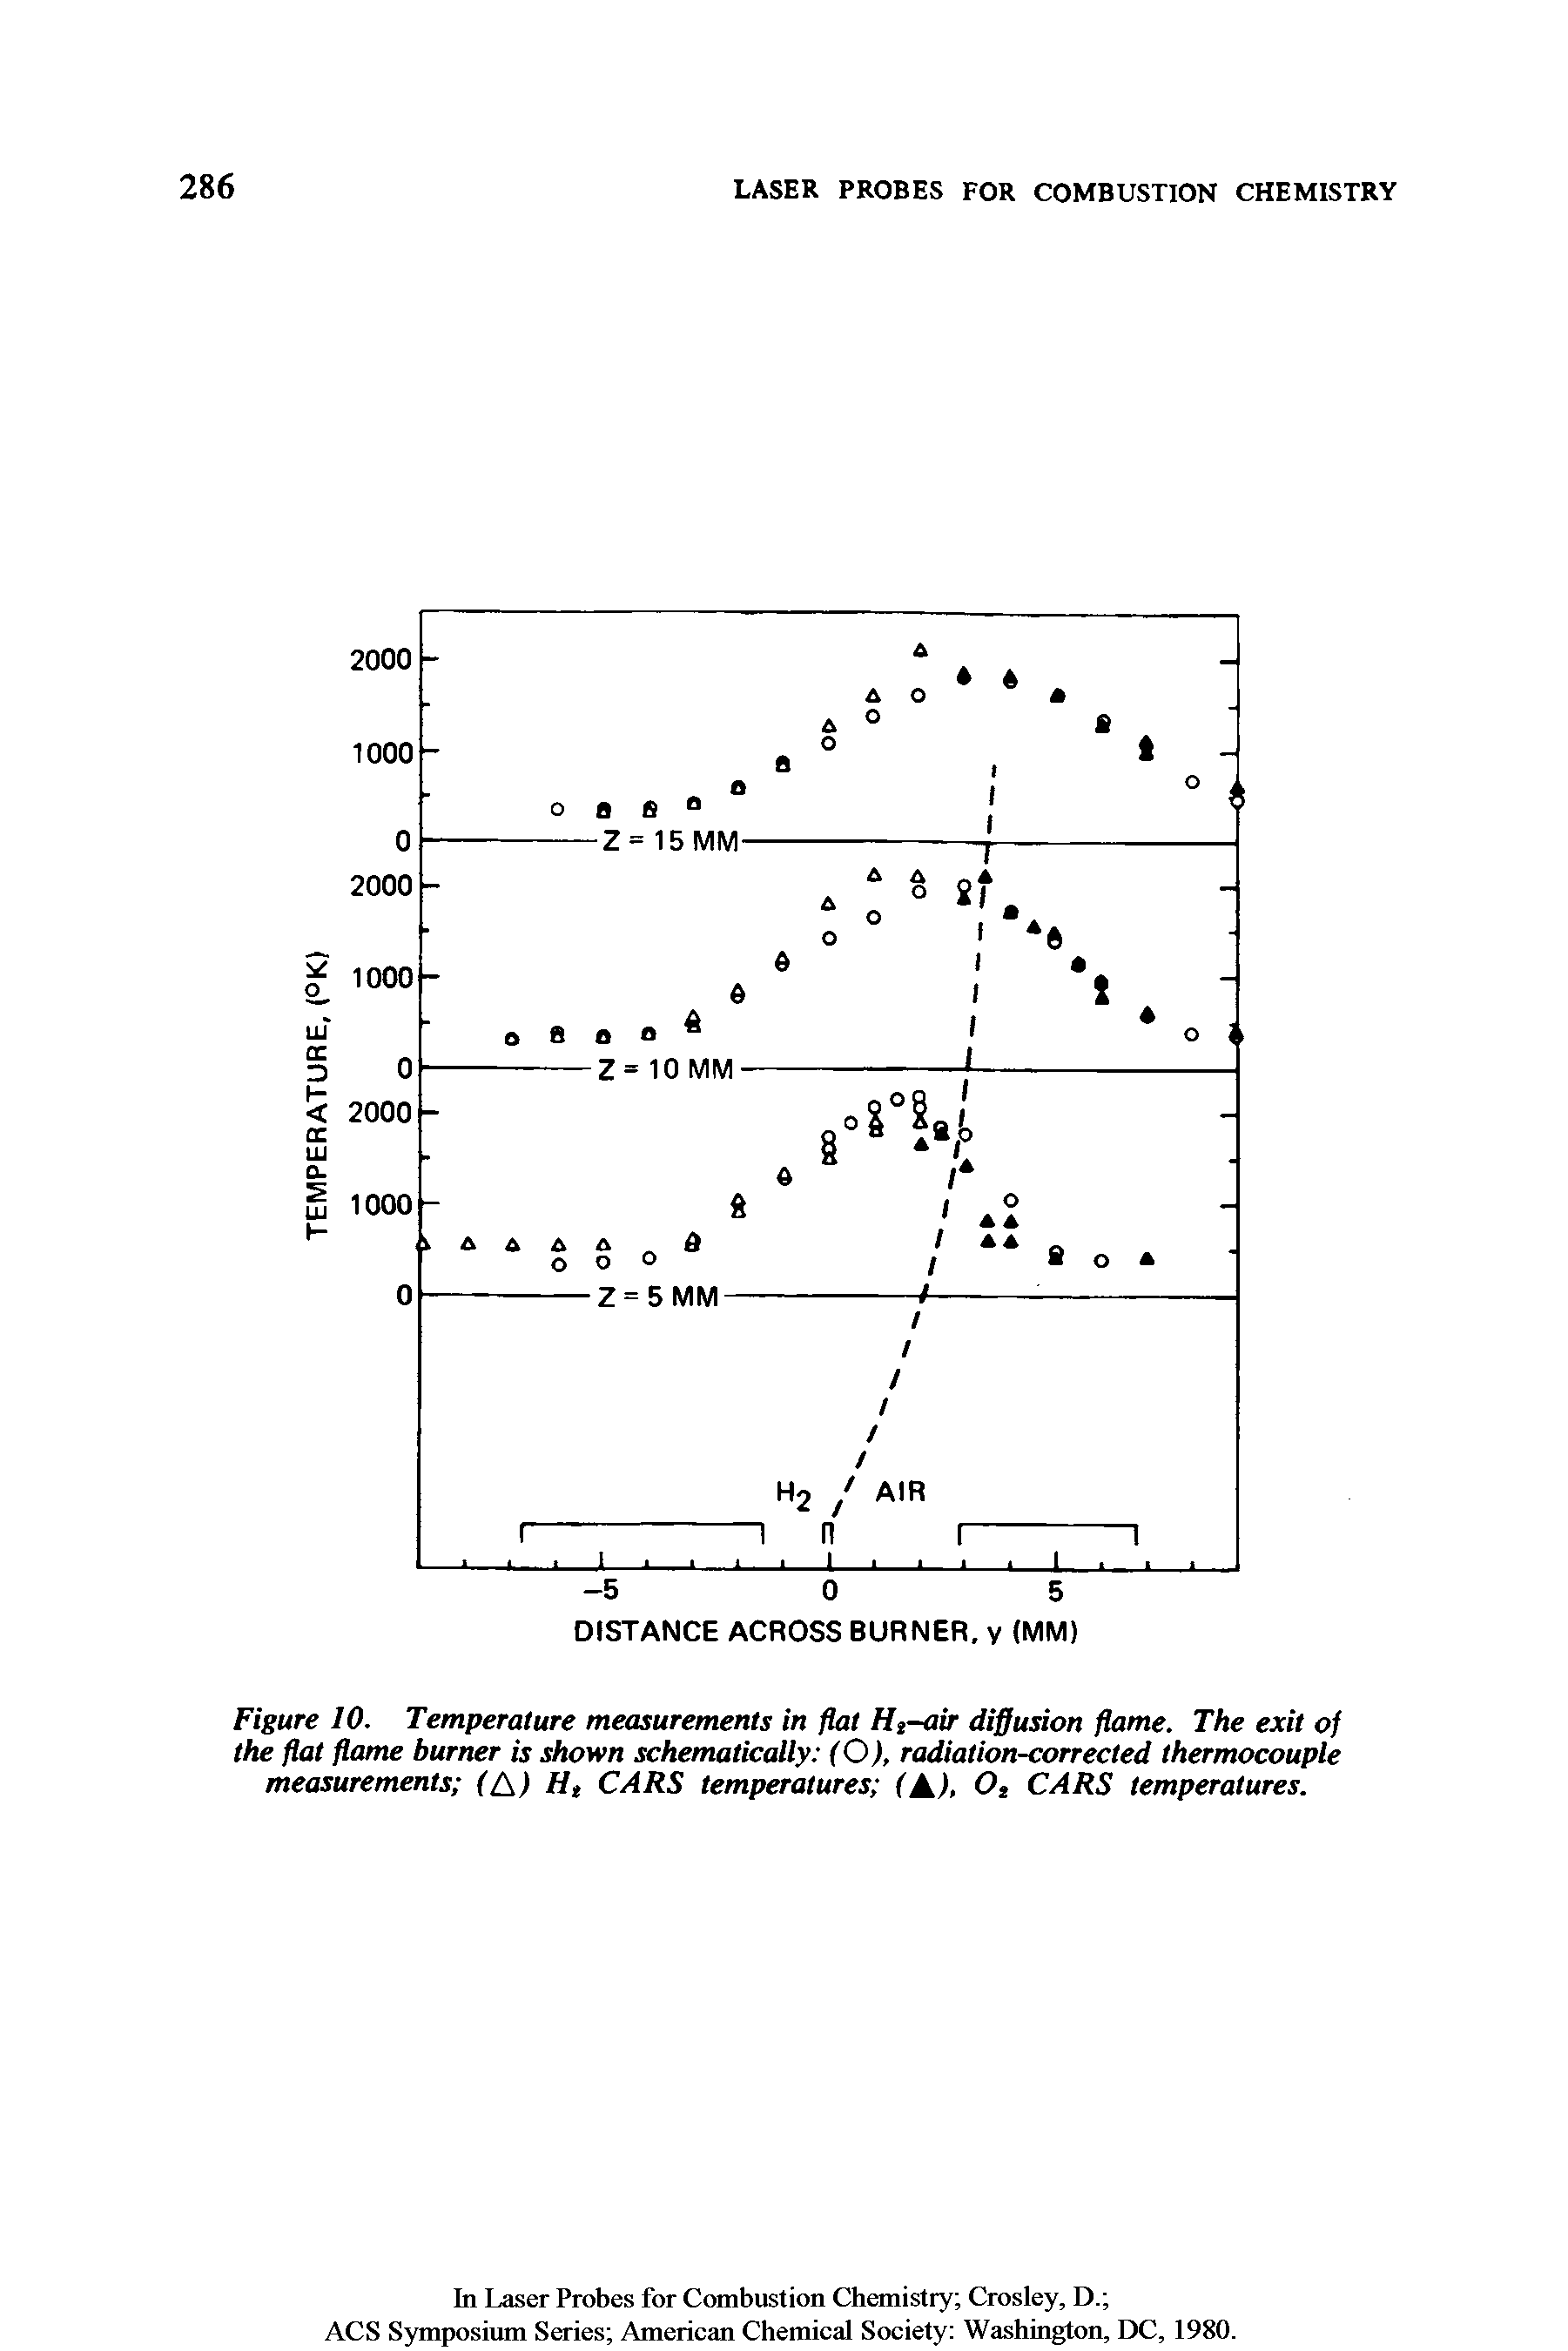 Figure 10. Temperature measurements in flat Ht-air diffusion flame. The exit of the flat flame burner is shown schematically (O), radiation-corrected thermocouple measurements (A) Ht CARS temperatures (A), Ot CARS temperatures.